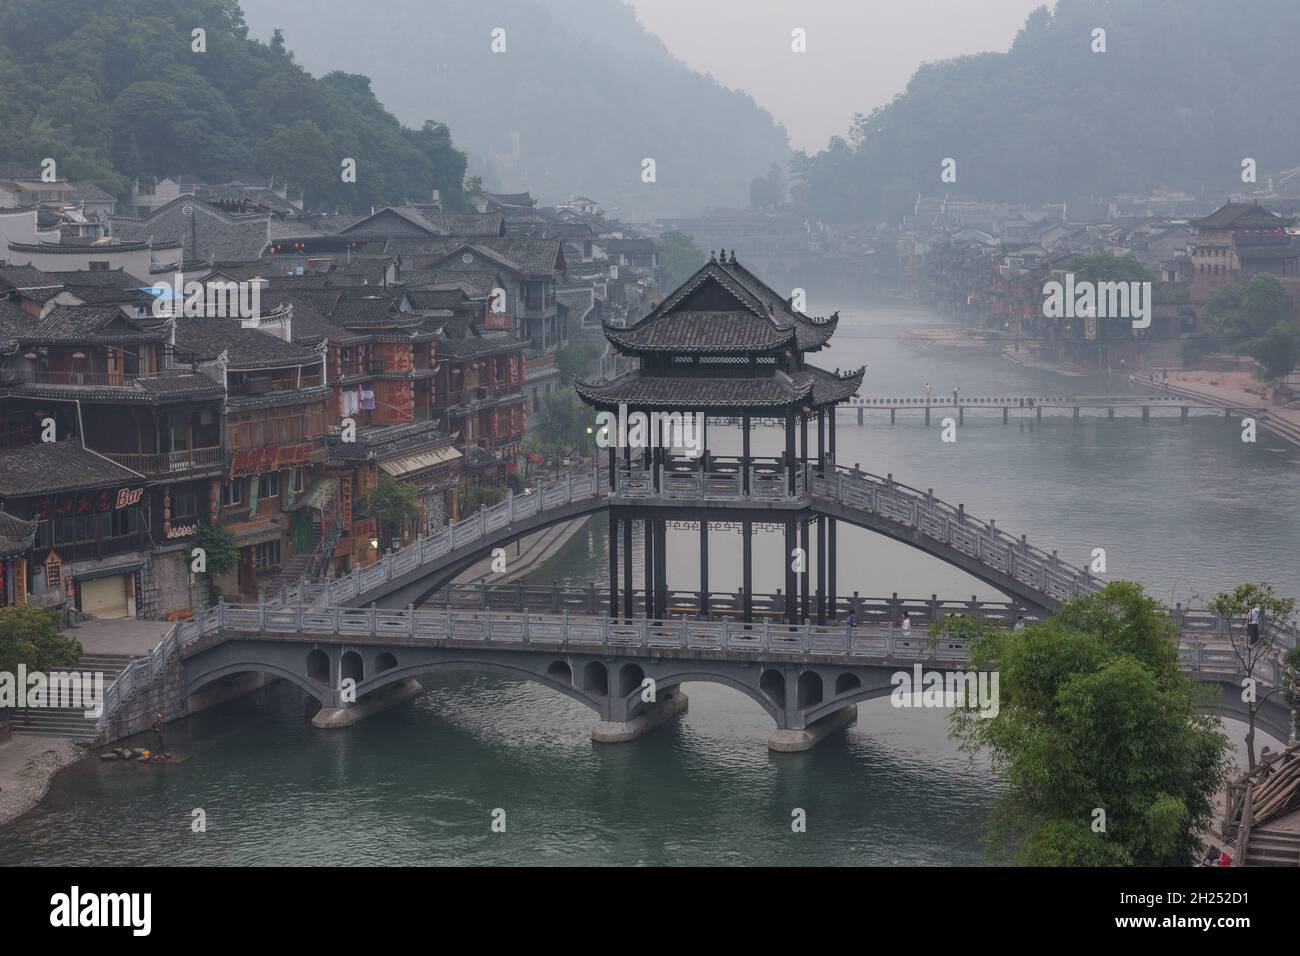 An early morning view of the Fenghuang Bridge over the Tuojiang River, Fenghuang, China. Stock Photo